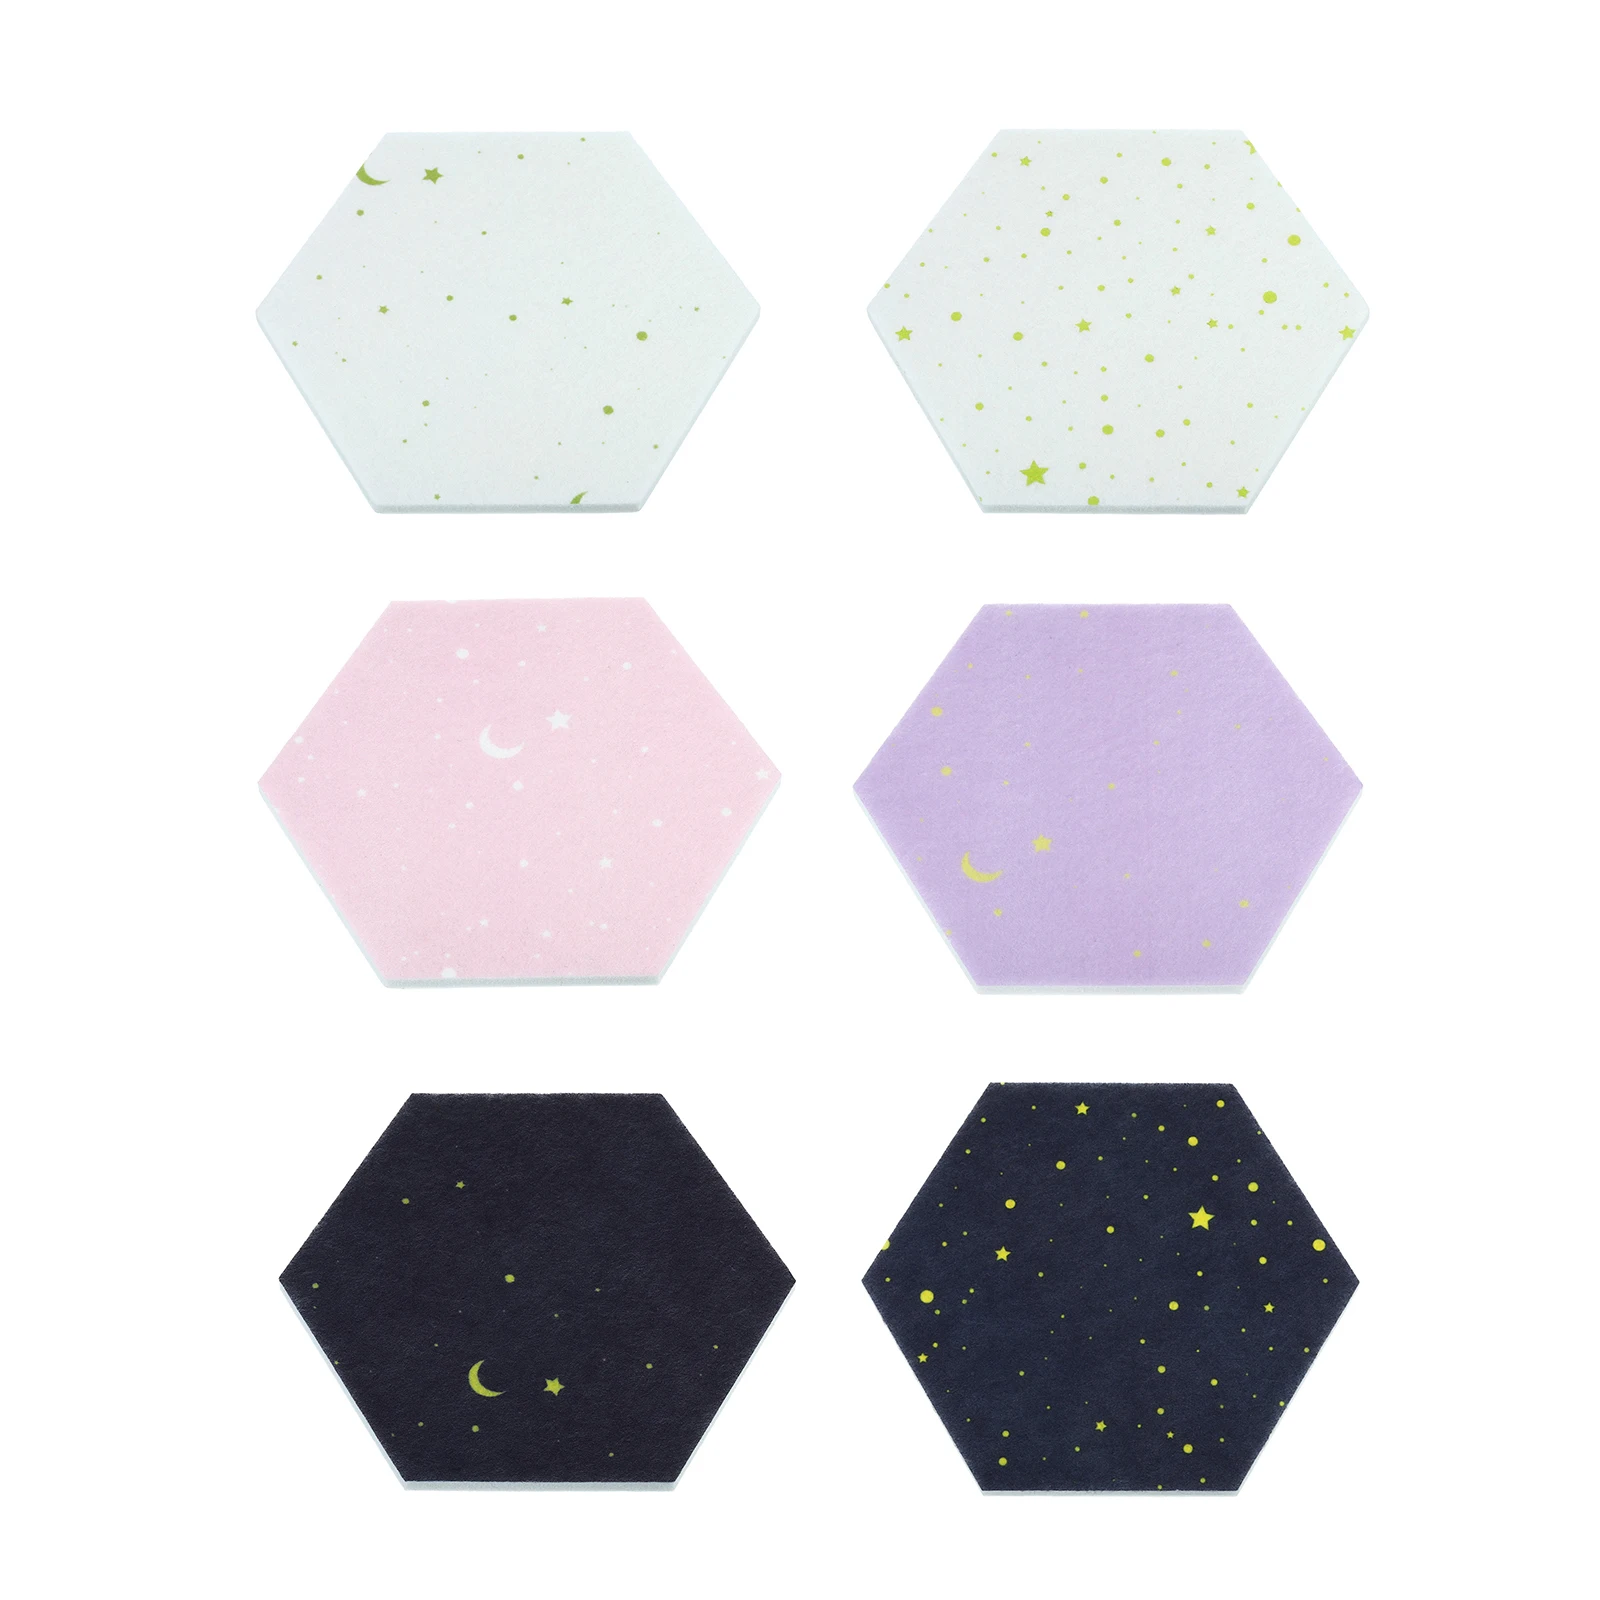 4Pcs Hexagon Felt Board Tile Bulletin Notice Cork Self Adhesive Pin Board Message Room Wall Decor Sticky Notes Photo Display felt wall sticker message board schedule file photo display board office home storage wall sticker background decor with pushpin